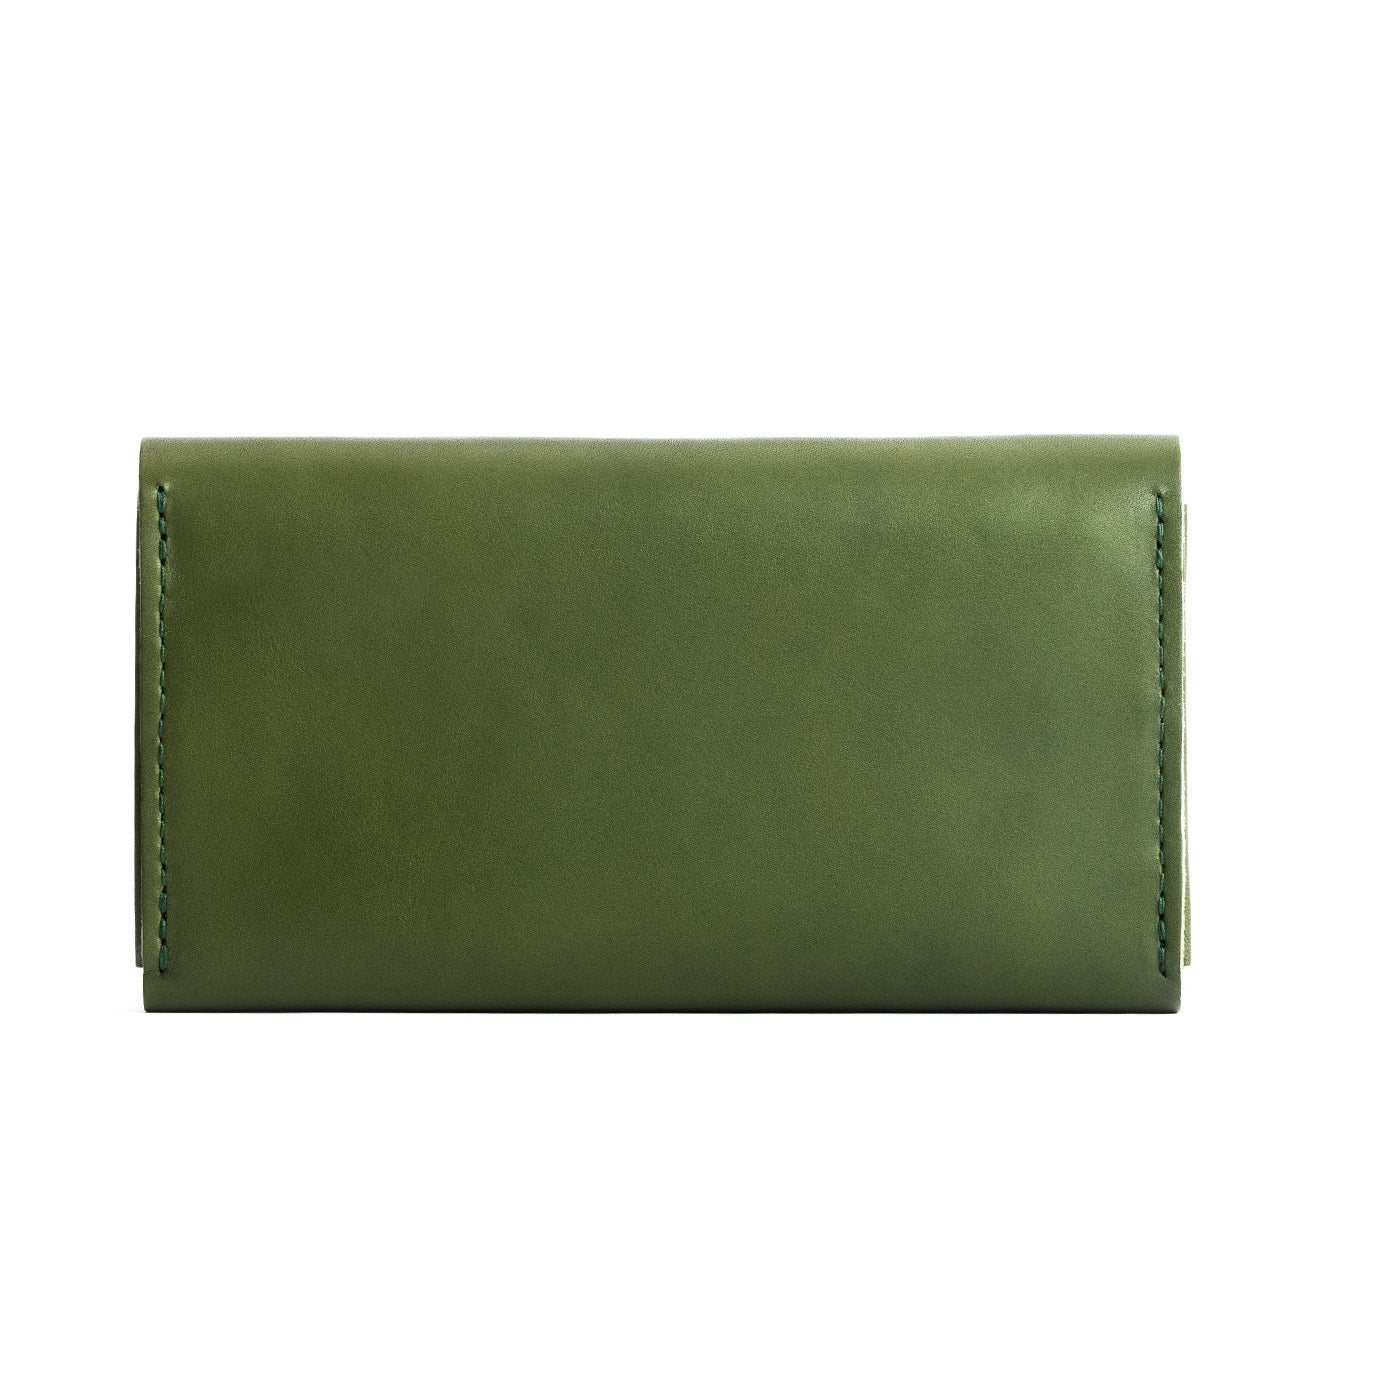 Pine | Backside of large leather wallet with snap closure